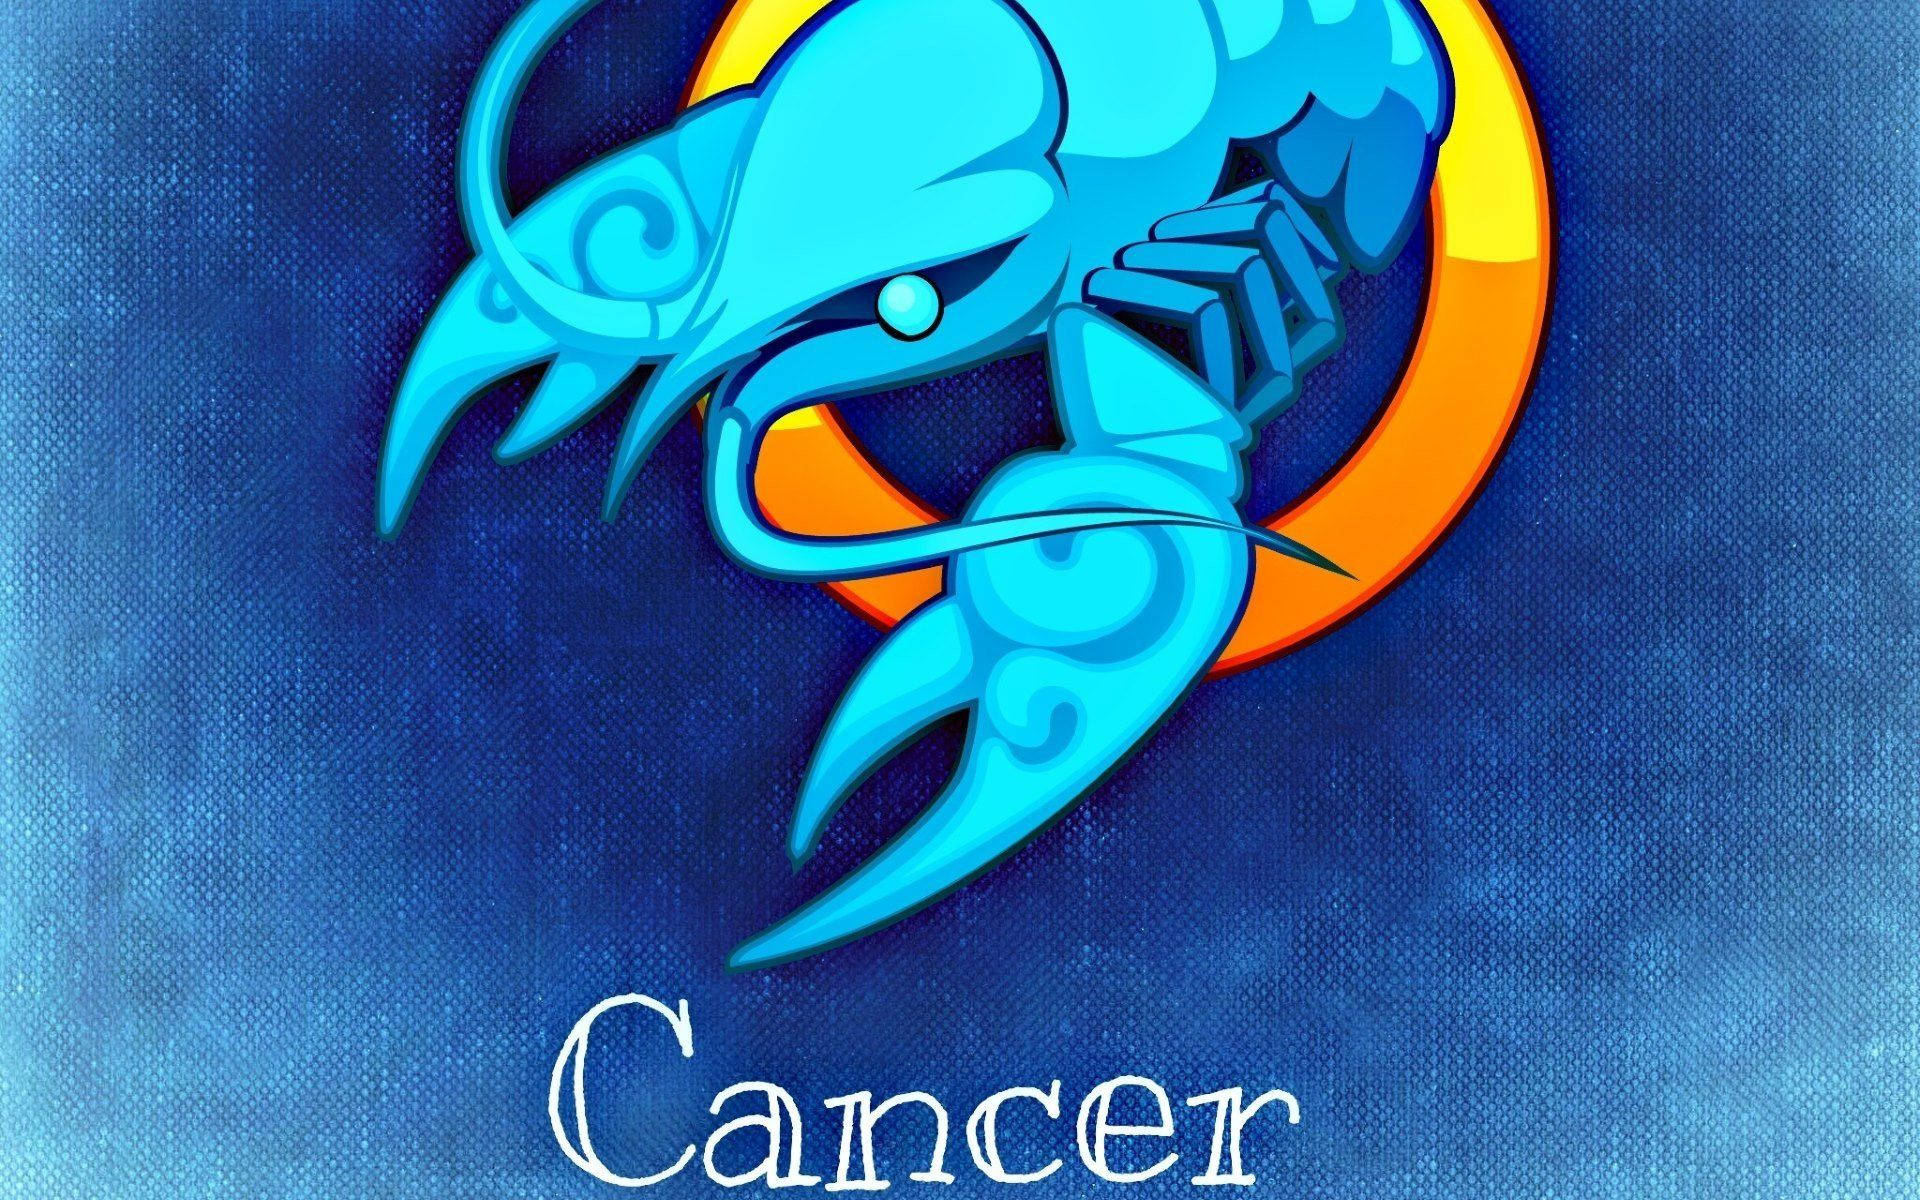 Zodiac Cancer Sign With Blue Crayfish Symbol Wallpaper